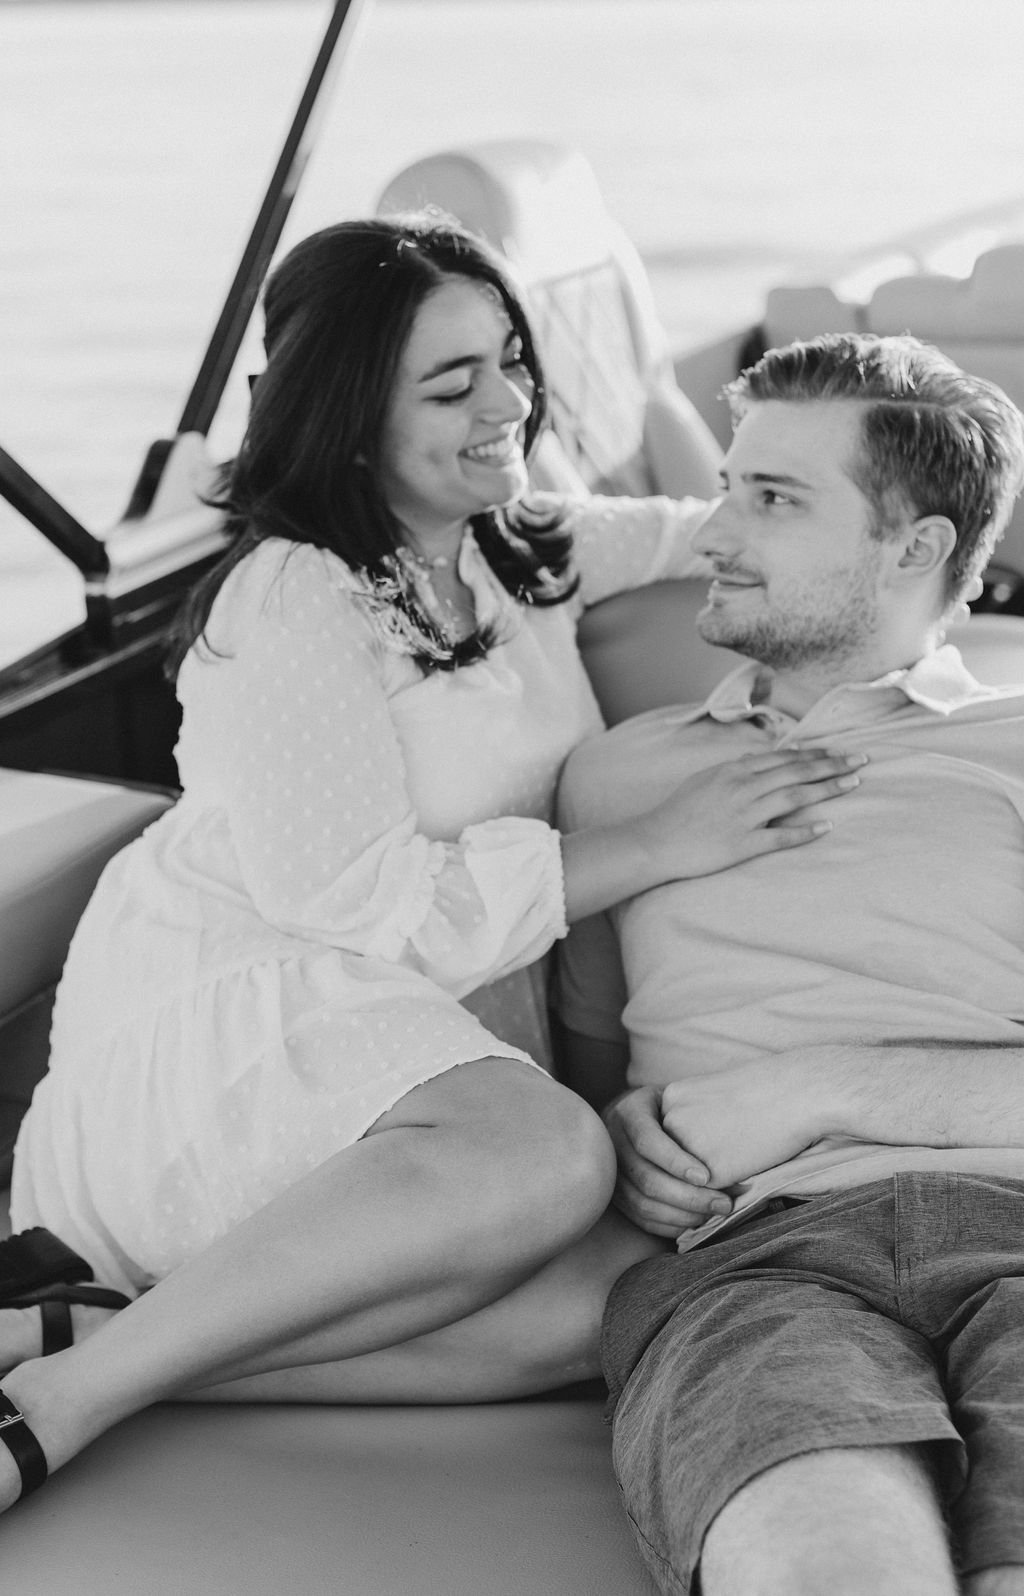 Dallas lakeside love story captured during engagement session